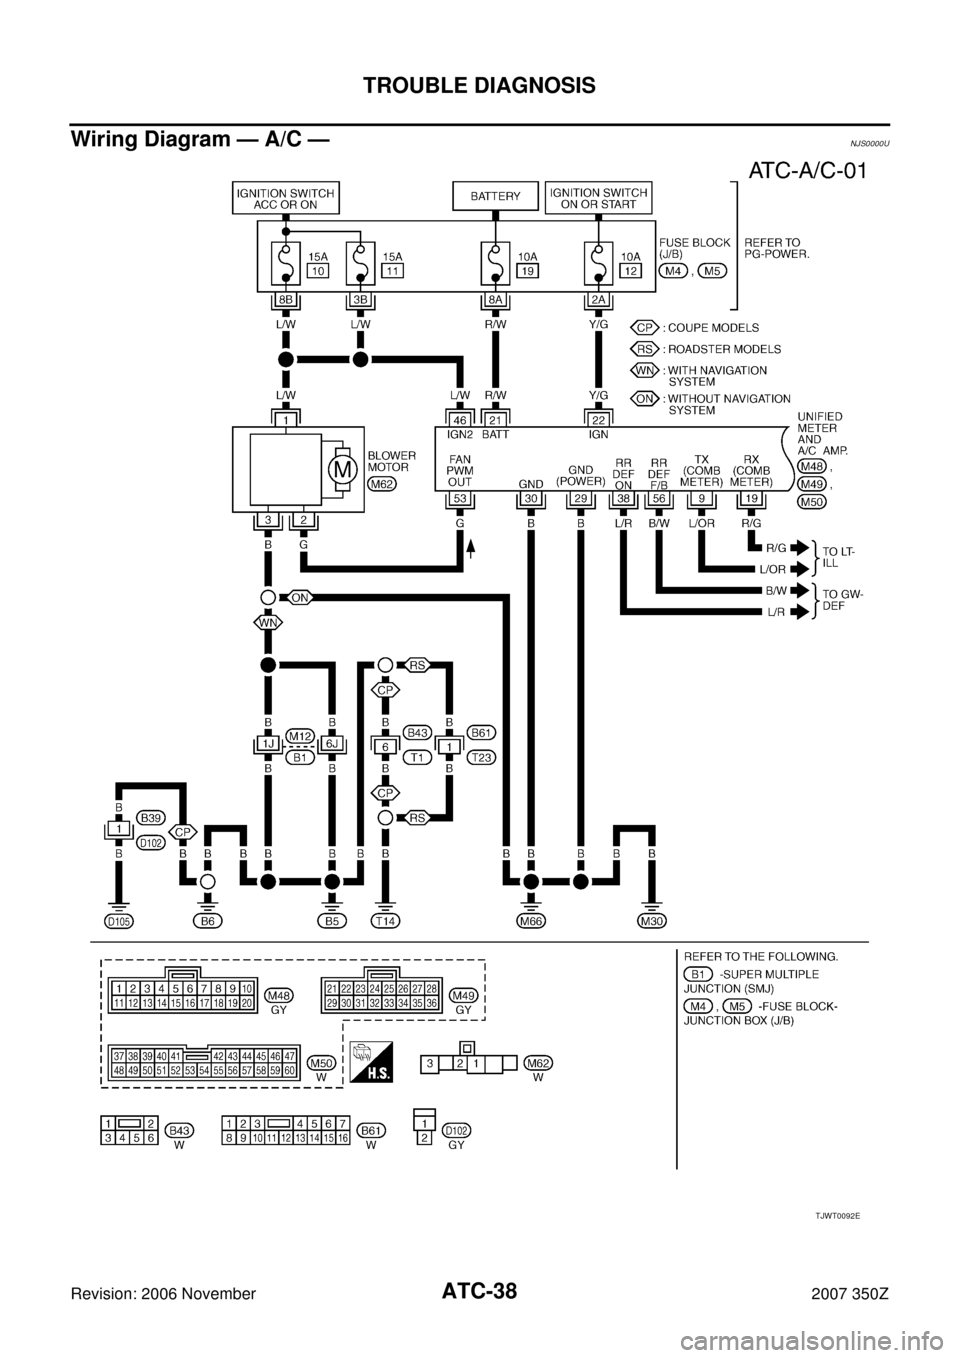 NISSAN 350Z 2007 Z33 Automatic Air Conditioner Owners Guide ATC-38
TROUBLE DIAGNOSIS
Revision: 2006 November2007 350Z
Wiring Diagram — A/C —NJS0000U
TJWT0092E 